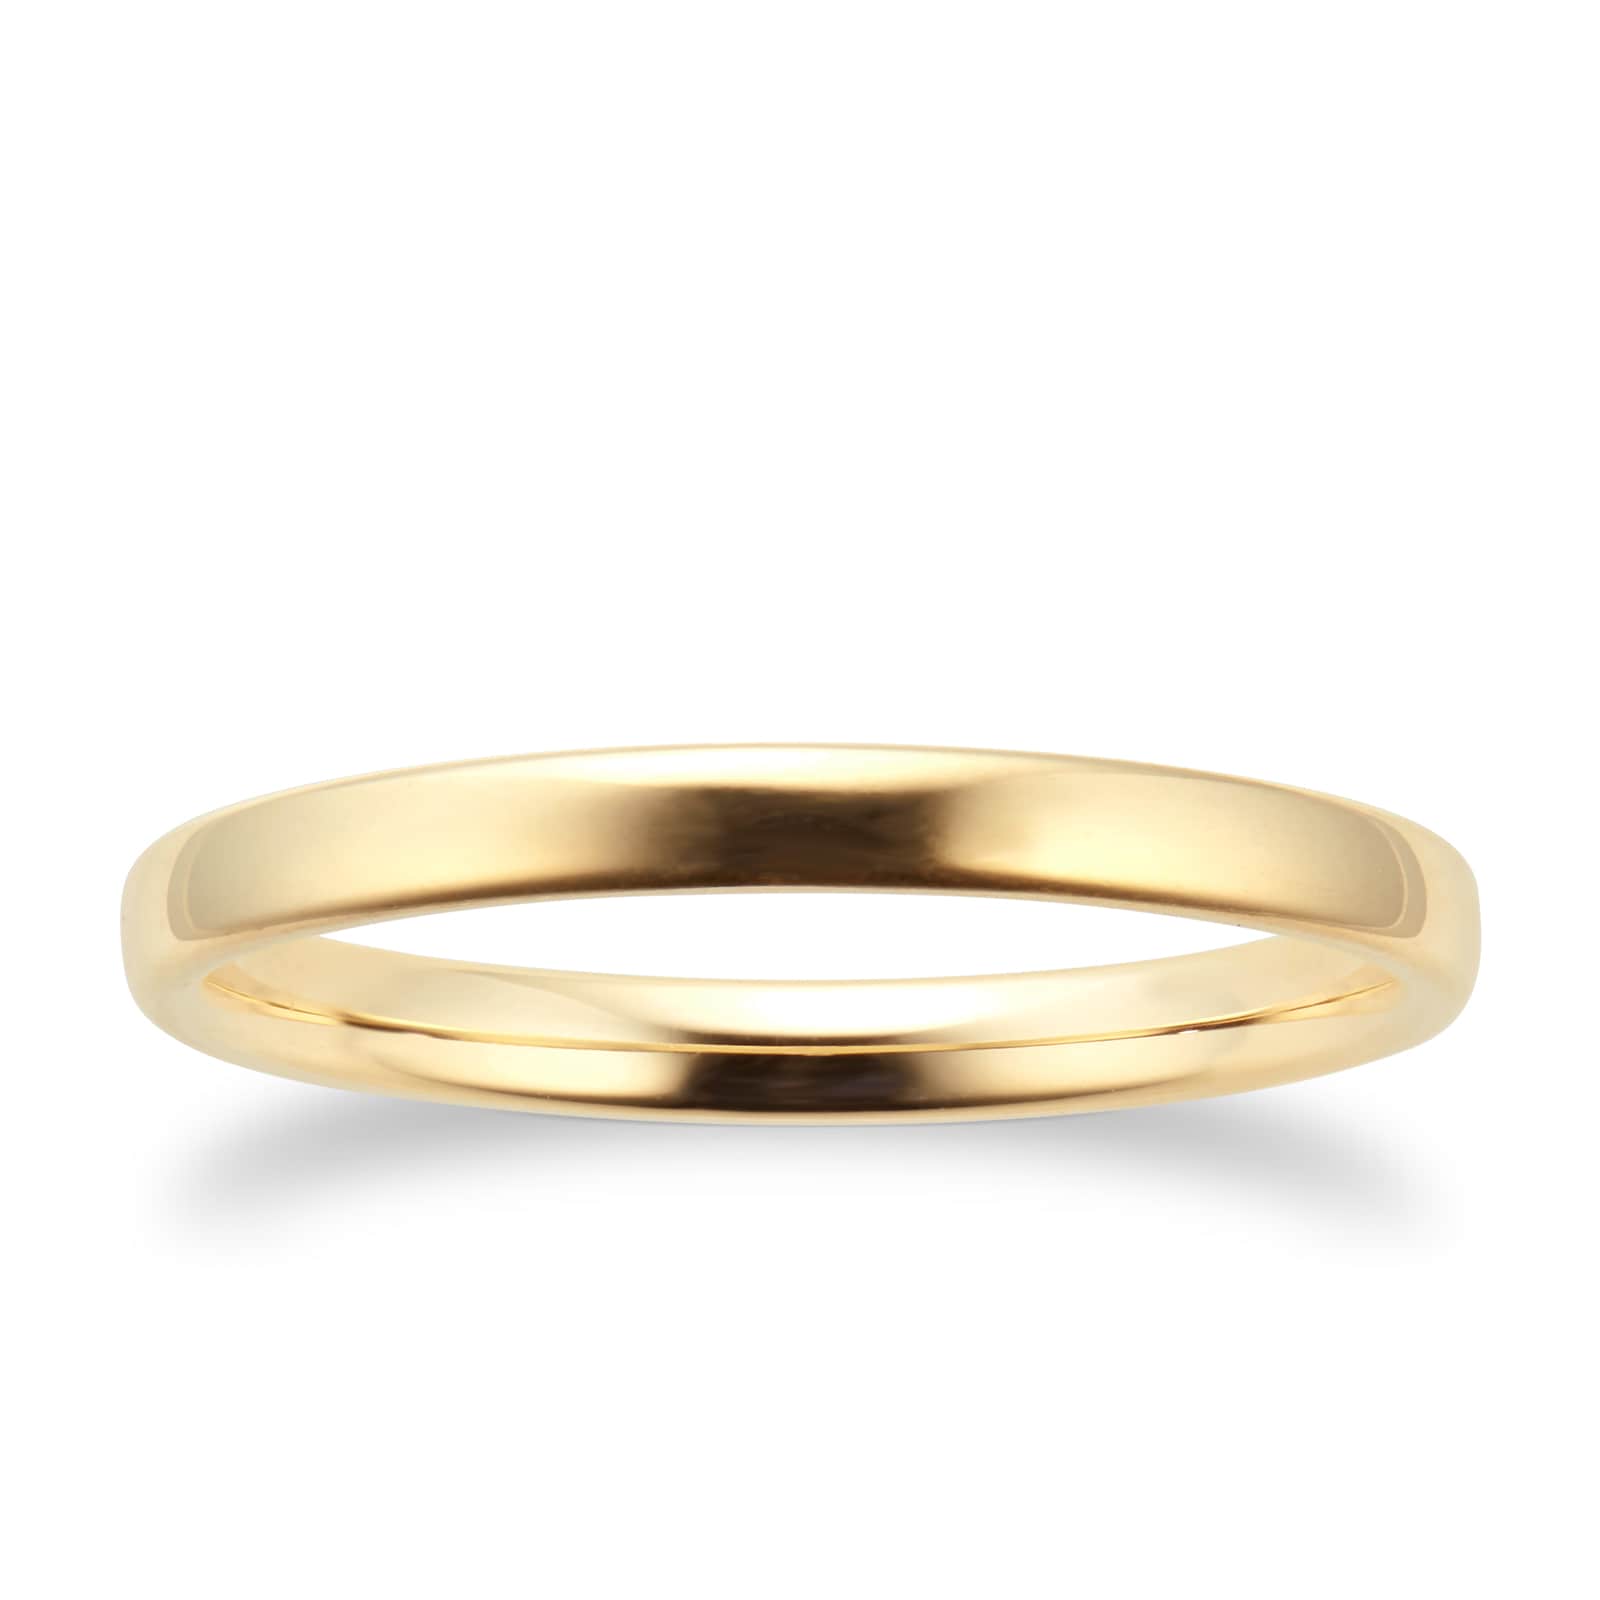 2mm Slight Court Standard Wedding Ring In 9 Carat Yellow Gold Ring Size H